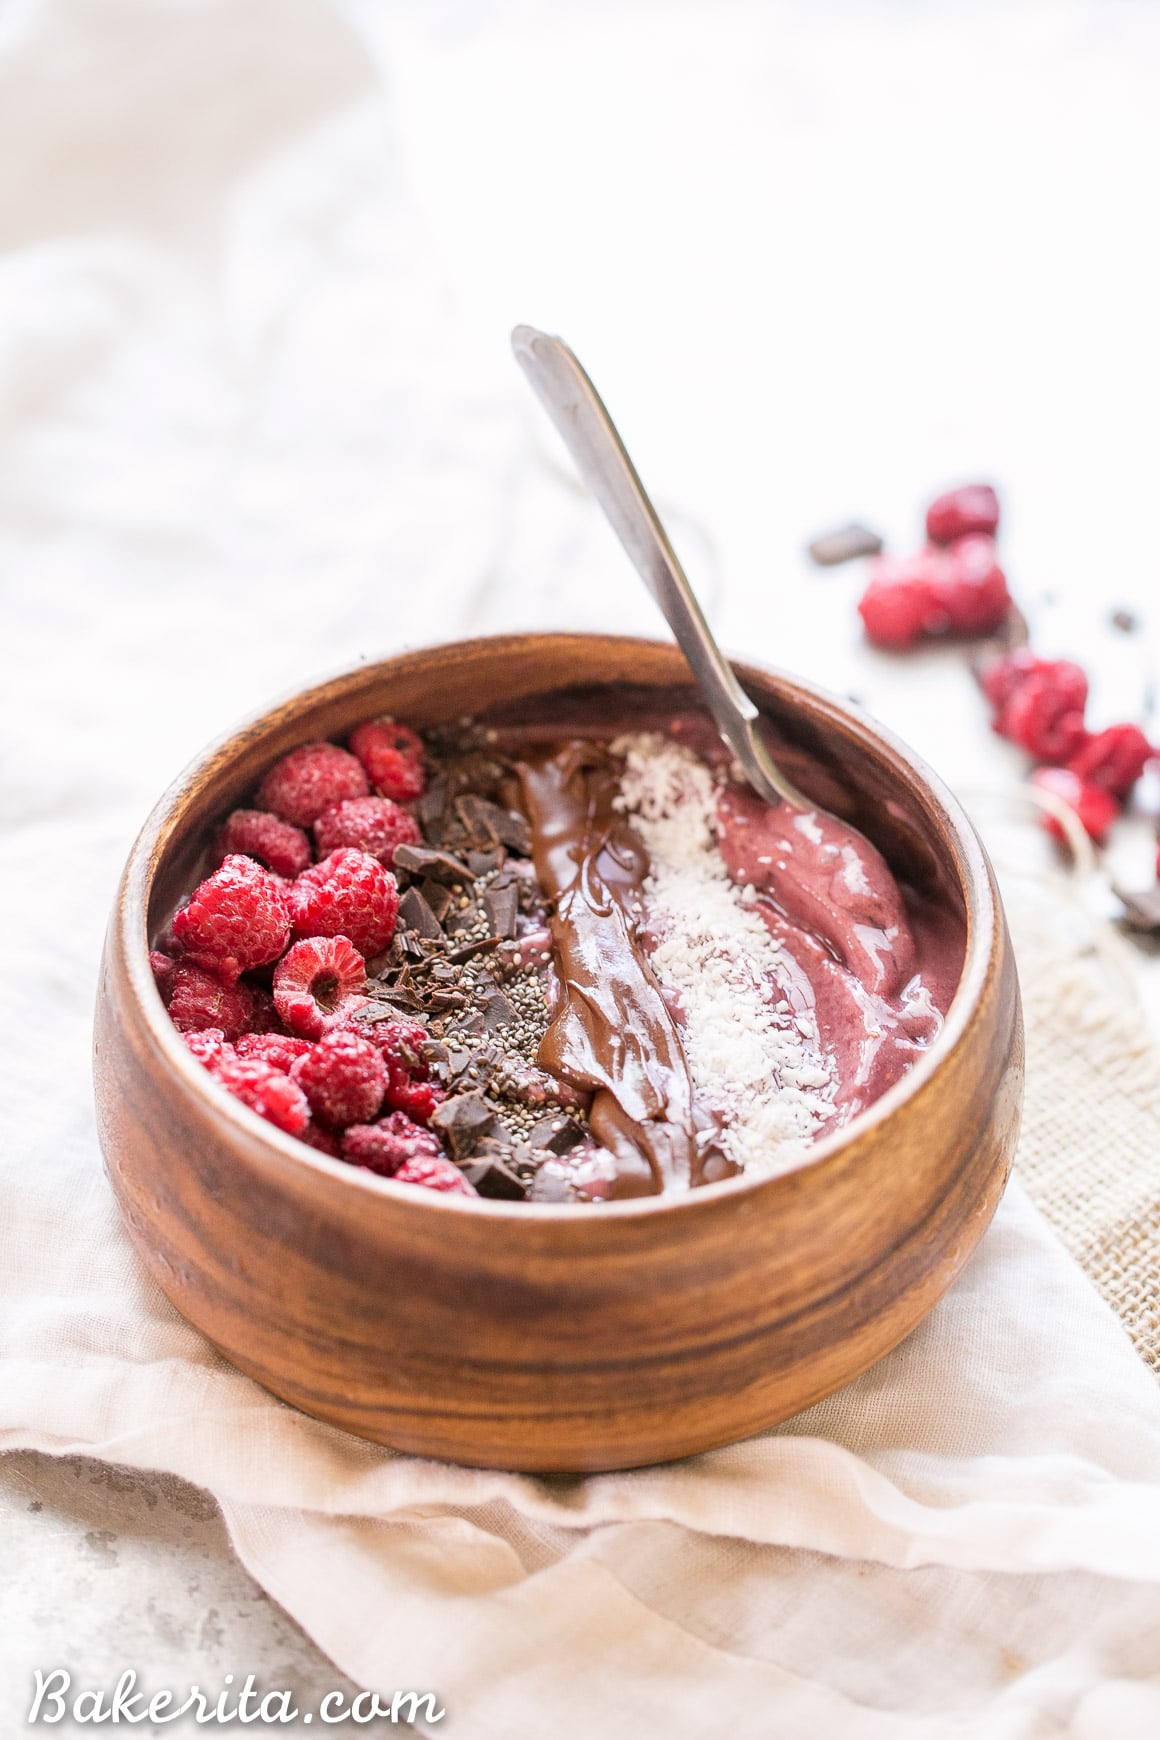 This Raspberry Acai Bowl is a refreshing & delicious breakfast, especially when you add your favorite toppings! This healthy breakfast is ready in a few minutes.